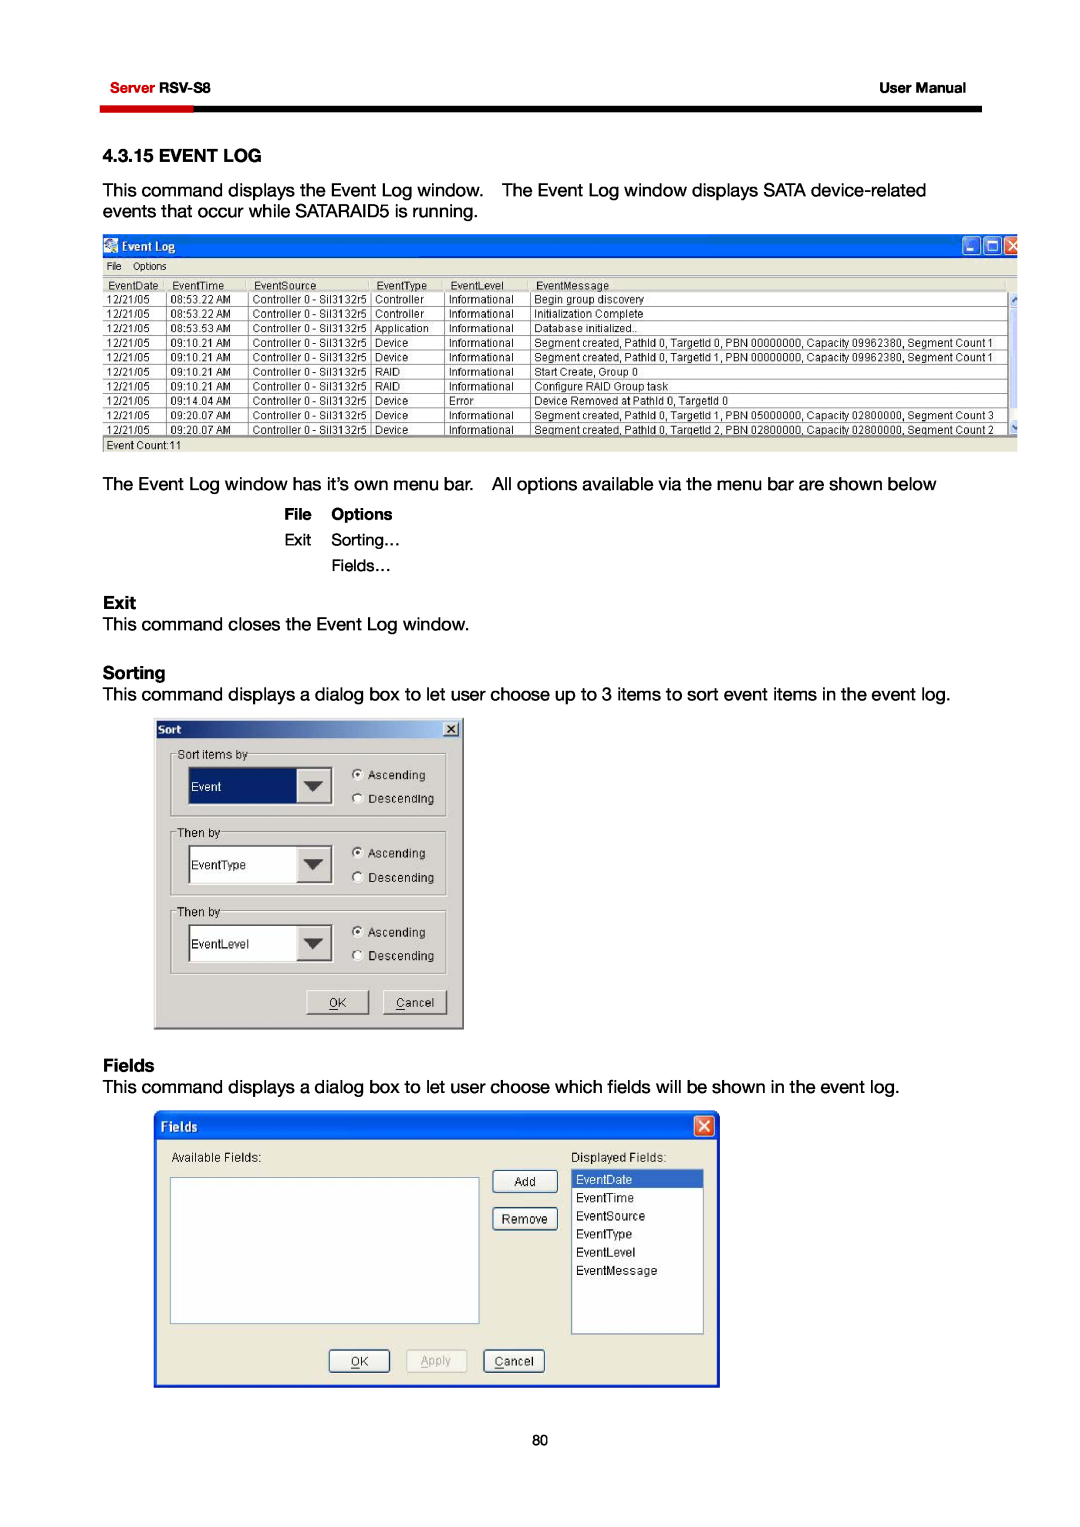 Rosewill RSV-S8 user manual Exit, This command closes the Event Log window, Sorting, Fields 